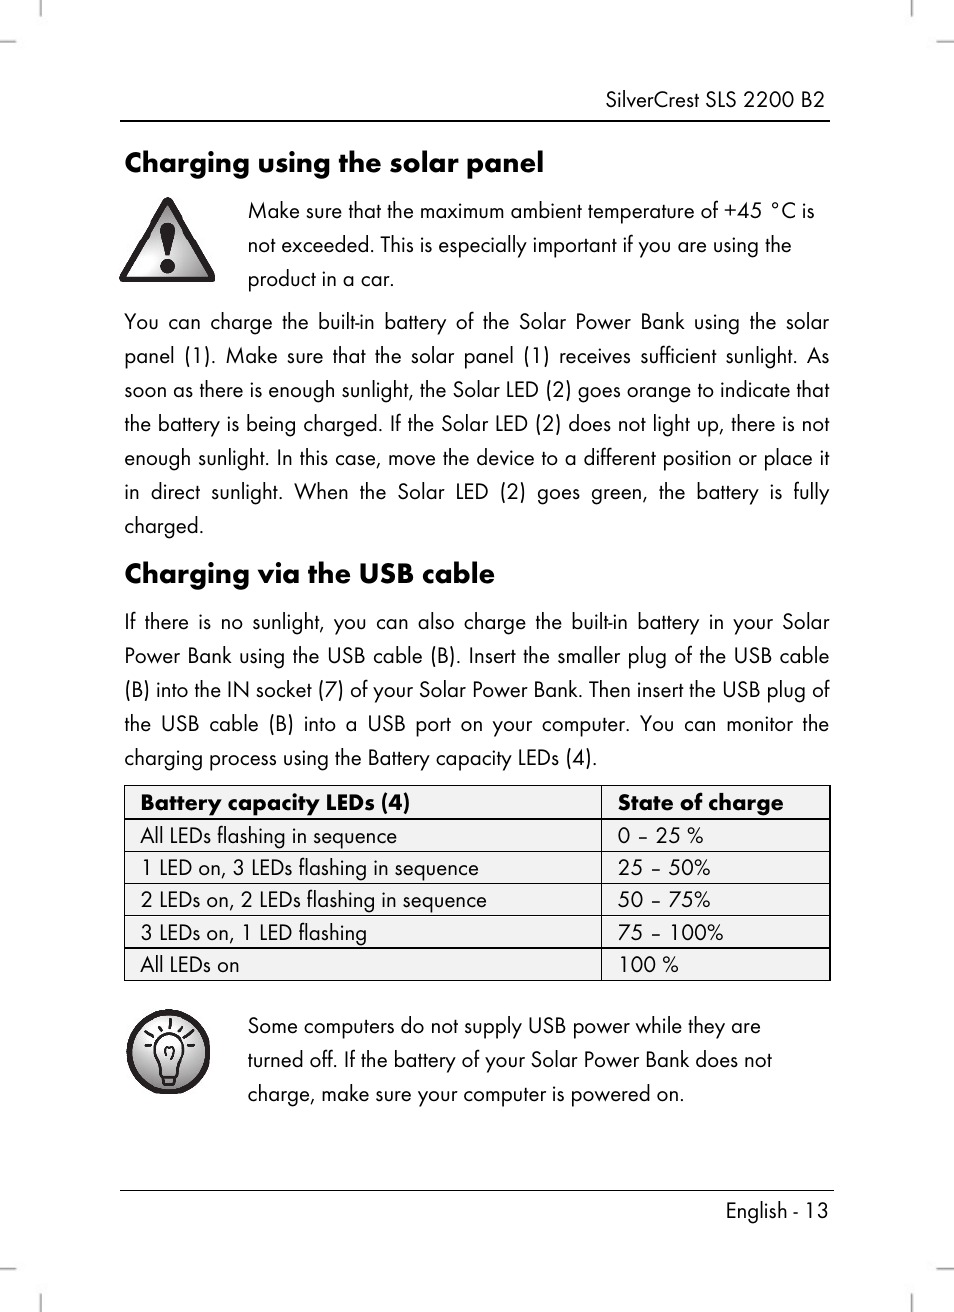 Charging using the solar panel, Charging via the usb cable | Silvercrest  SLS 2200 B2 User Manual | Page 15 / 106